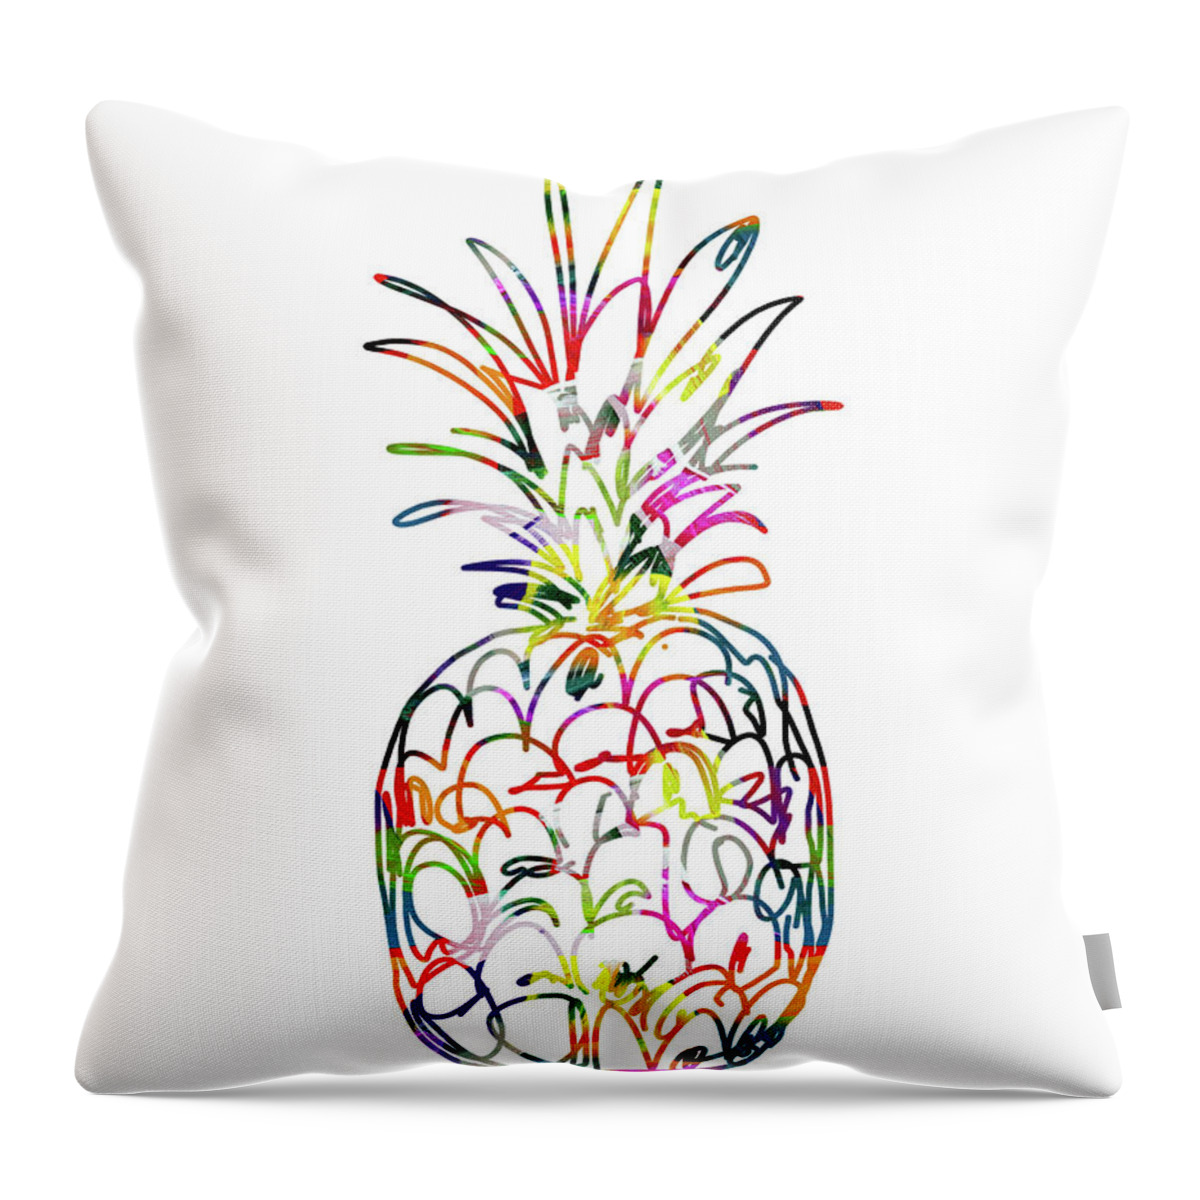 Pineapple Throw Pillow featuring the digital art Electric Pineapple - Art by Linda Woods by Linda Woods